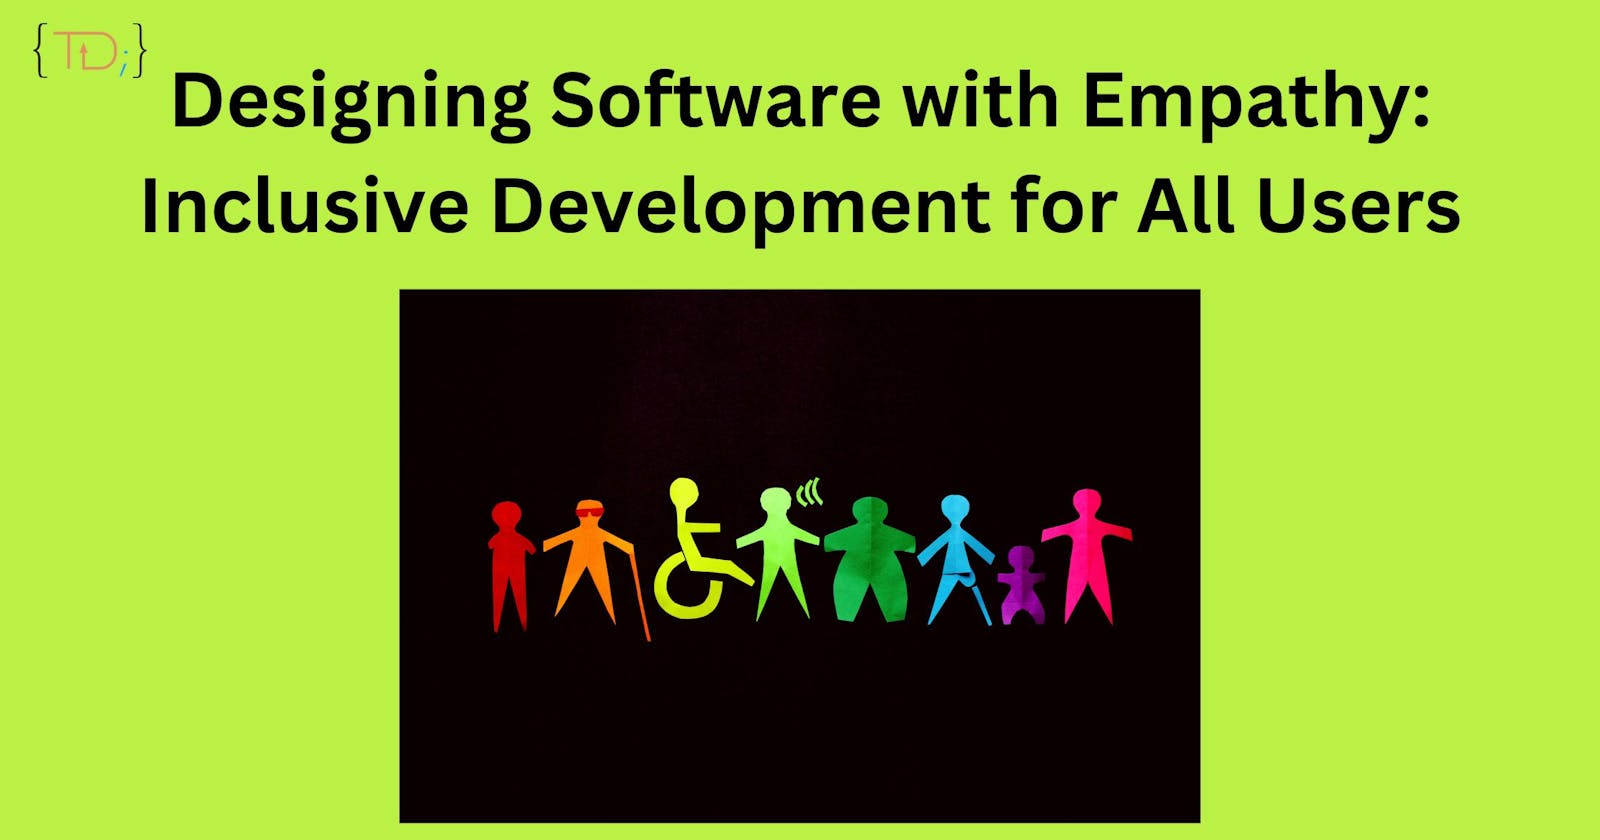 Designing Software with Empathy: Inclusive Development for All Users